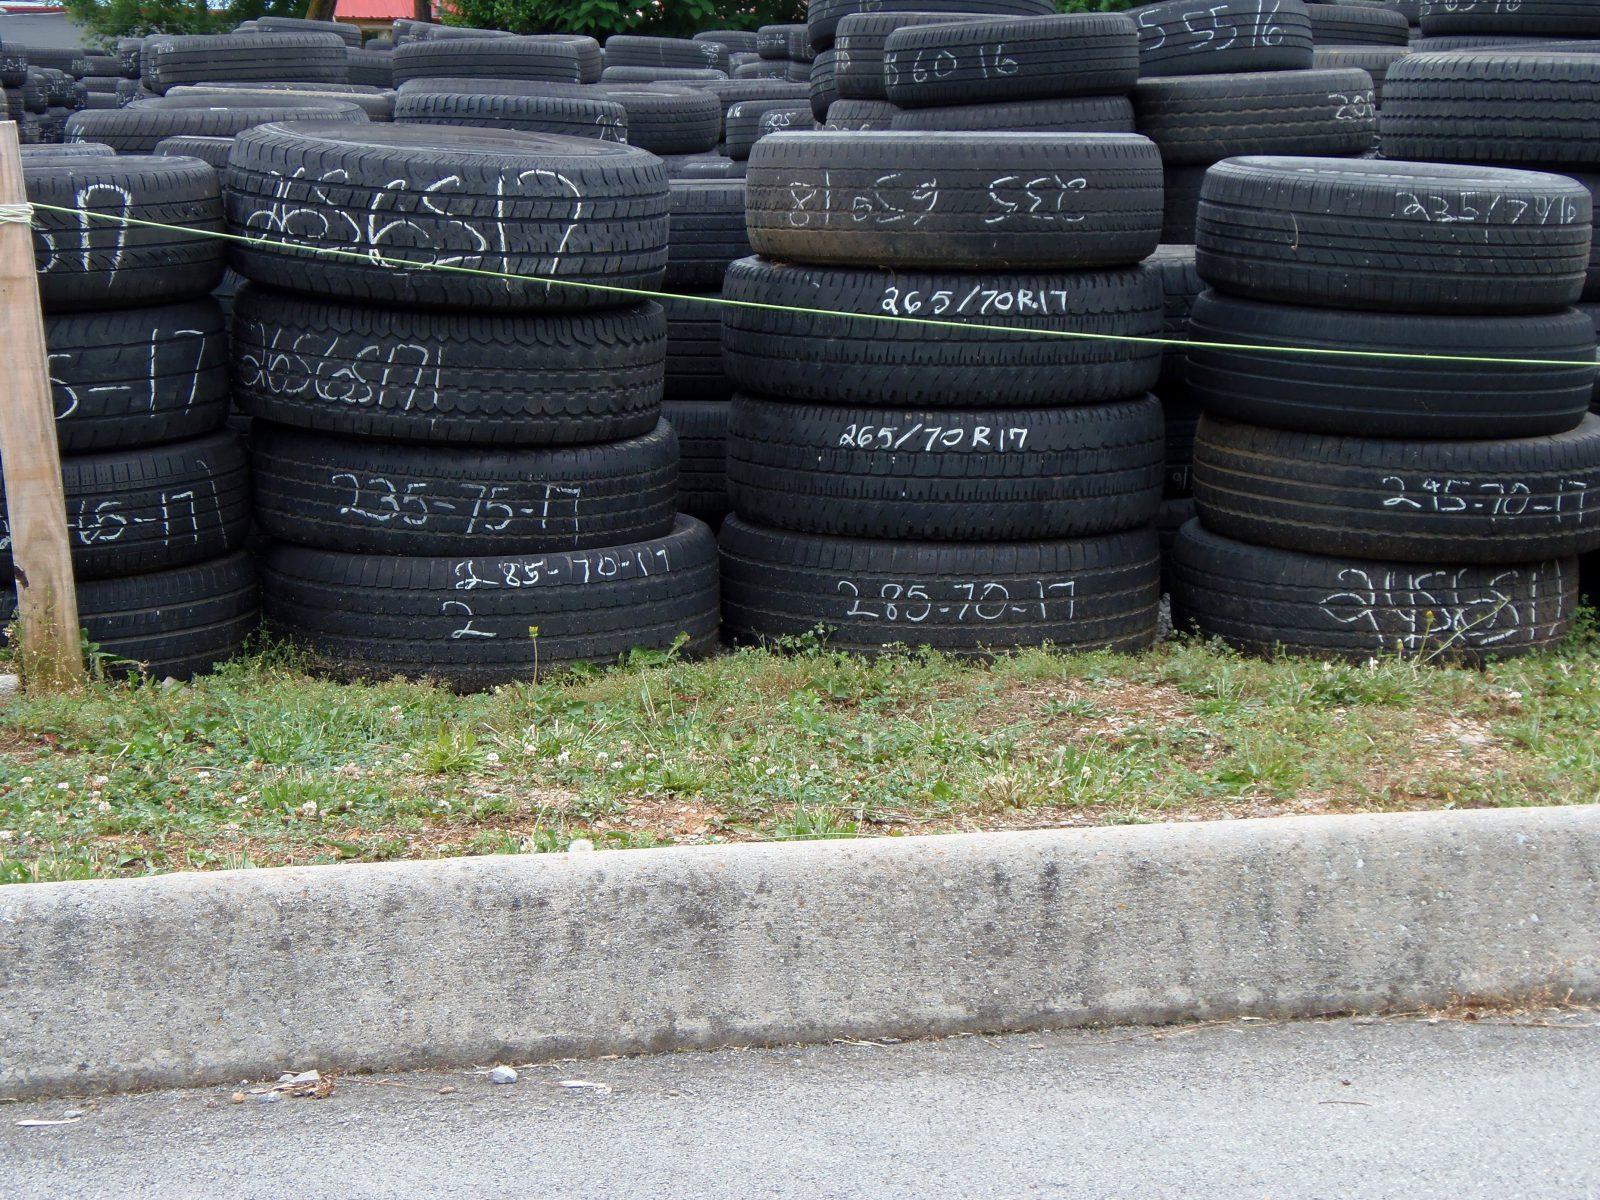 Tips for Buying Good Used Tires - CAR FROM JAPAN